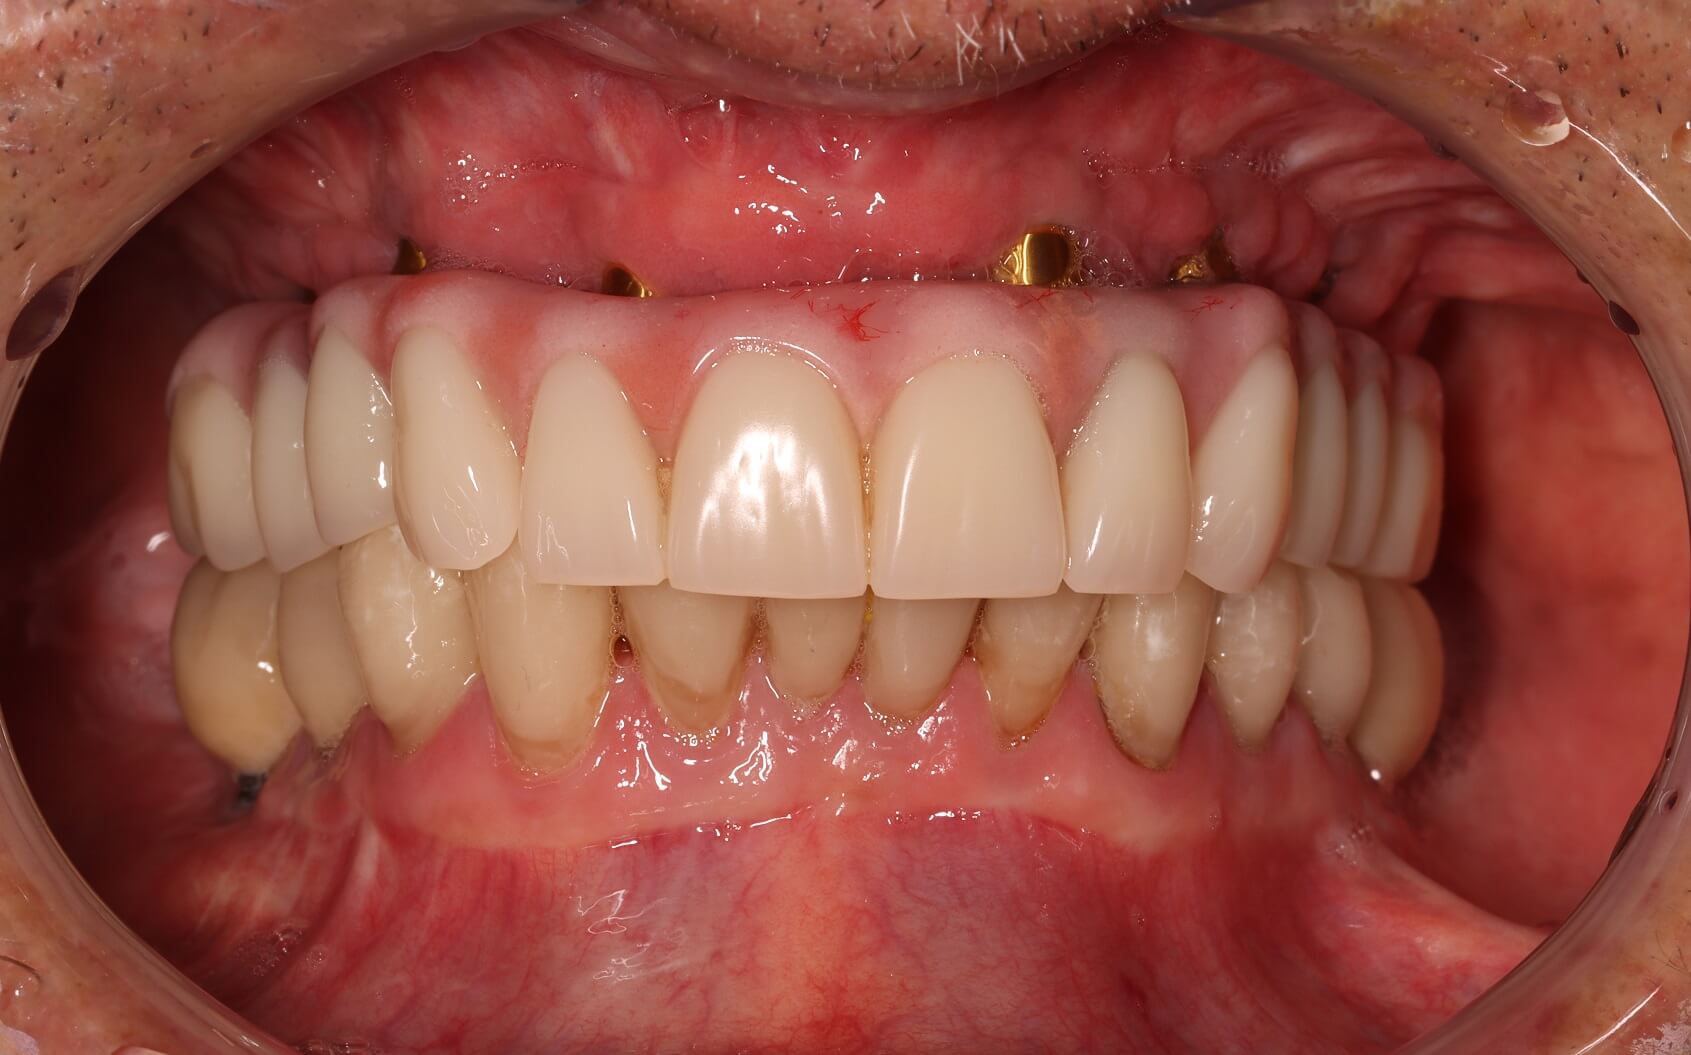 dental implants patients story: full mouth restoration